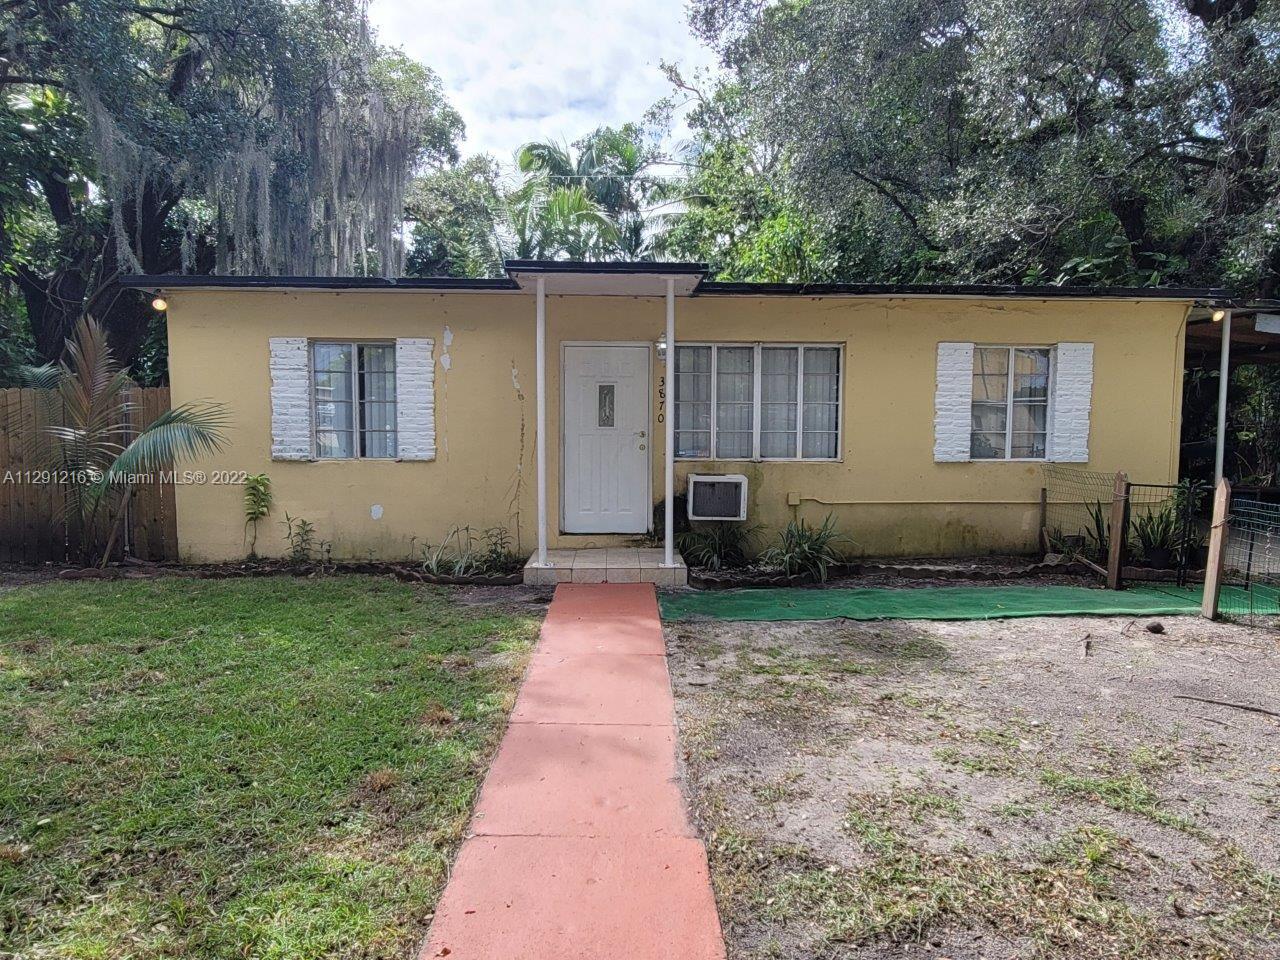 Opportunity awaits a savvy Buyer in Coconut Grove. Original 3/2 home on a beautiful lush lot can be rehabbed or dropped. 80 x 100 lot meets ideal NCD2 requirements.